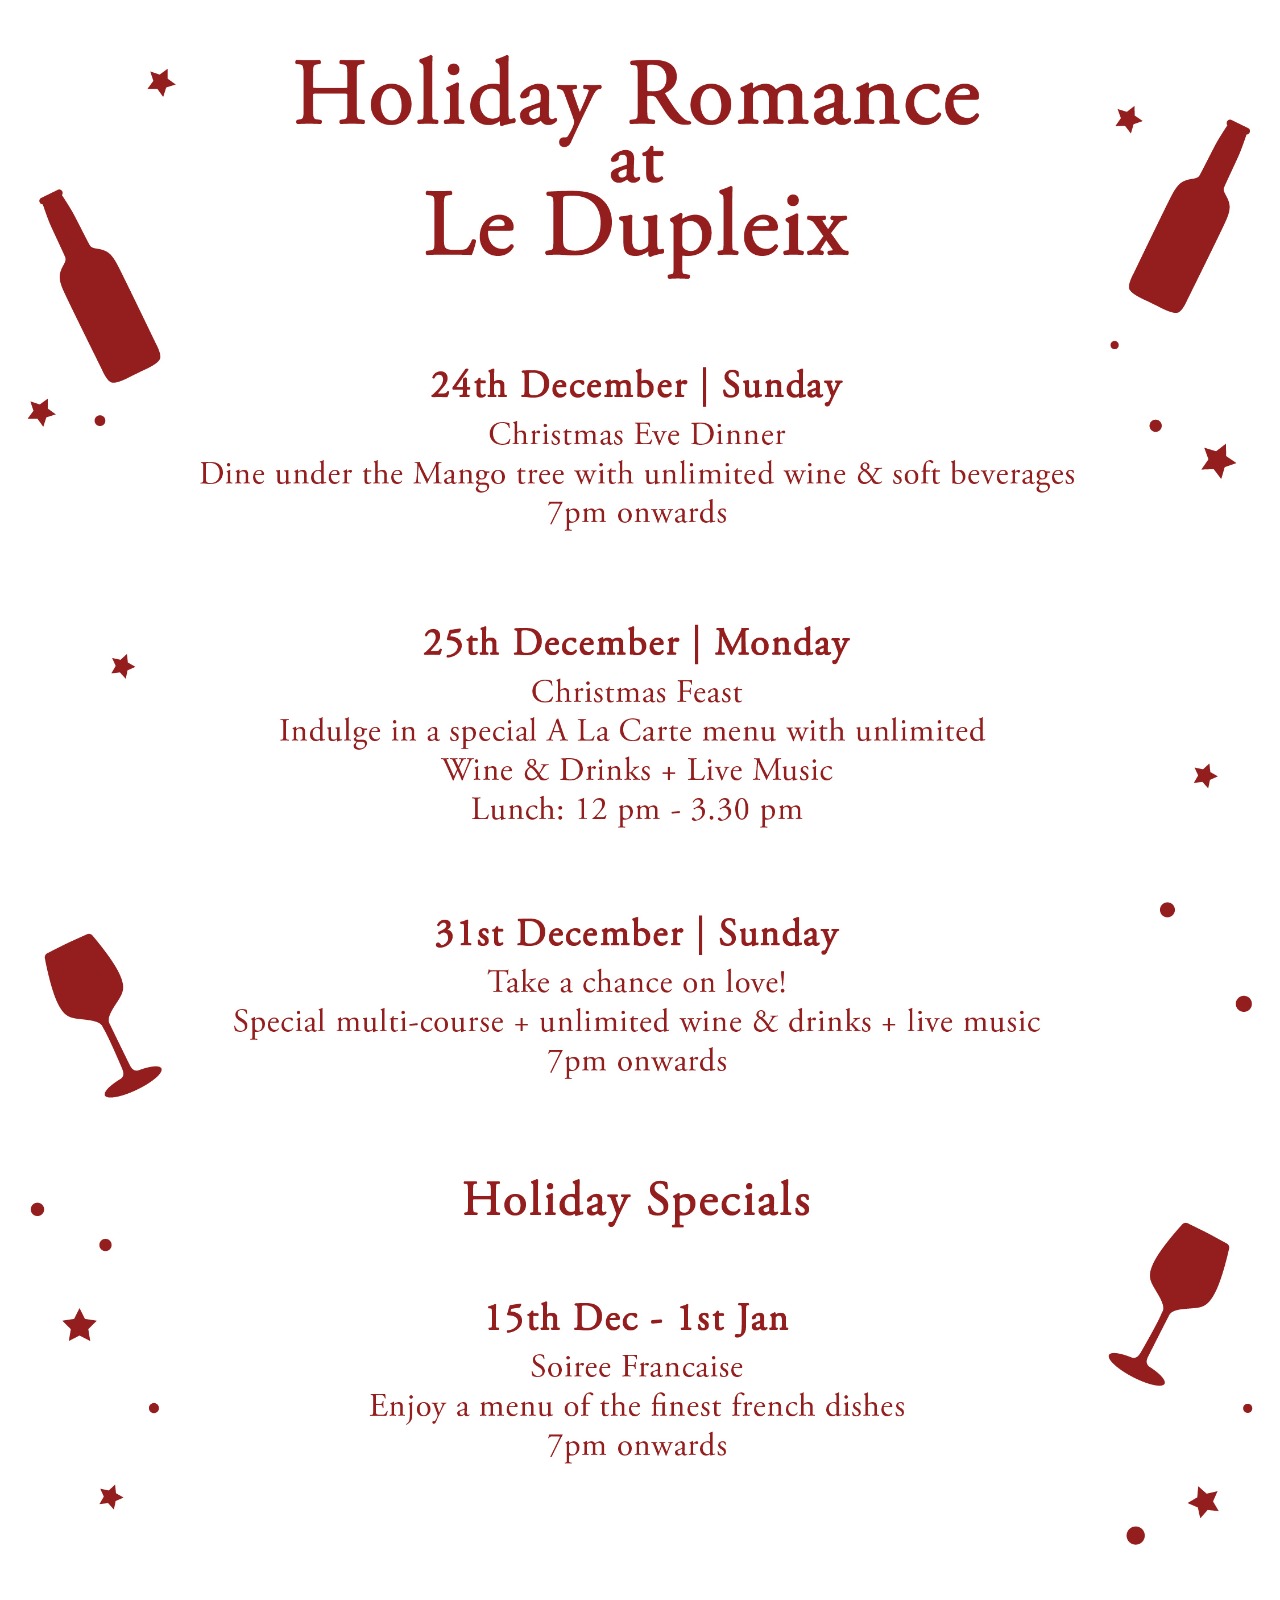 Christmas at Le Dupleix in Pondicherry holiday romance fine dining